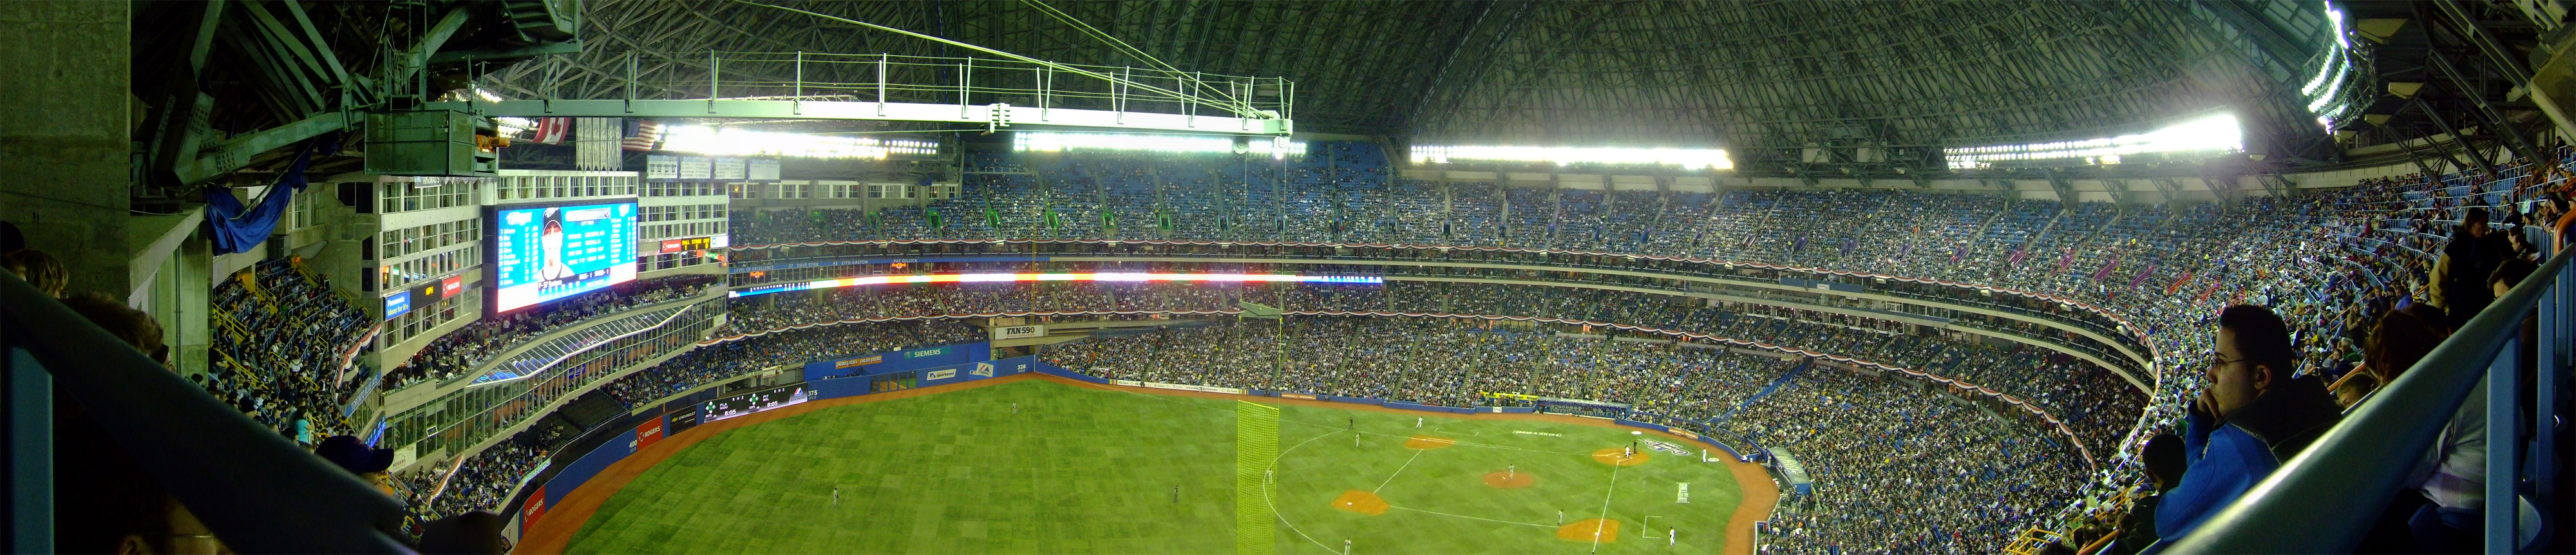 Rogers Centre Panorama By Primalorb